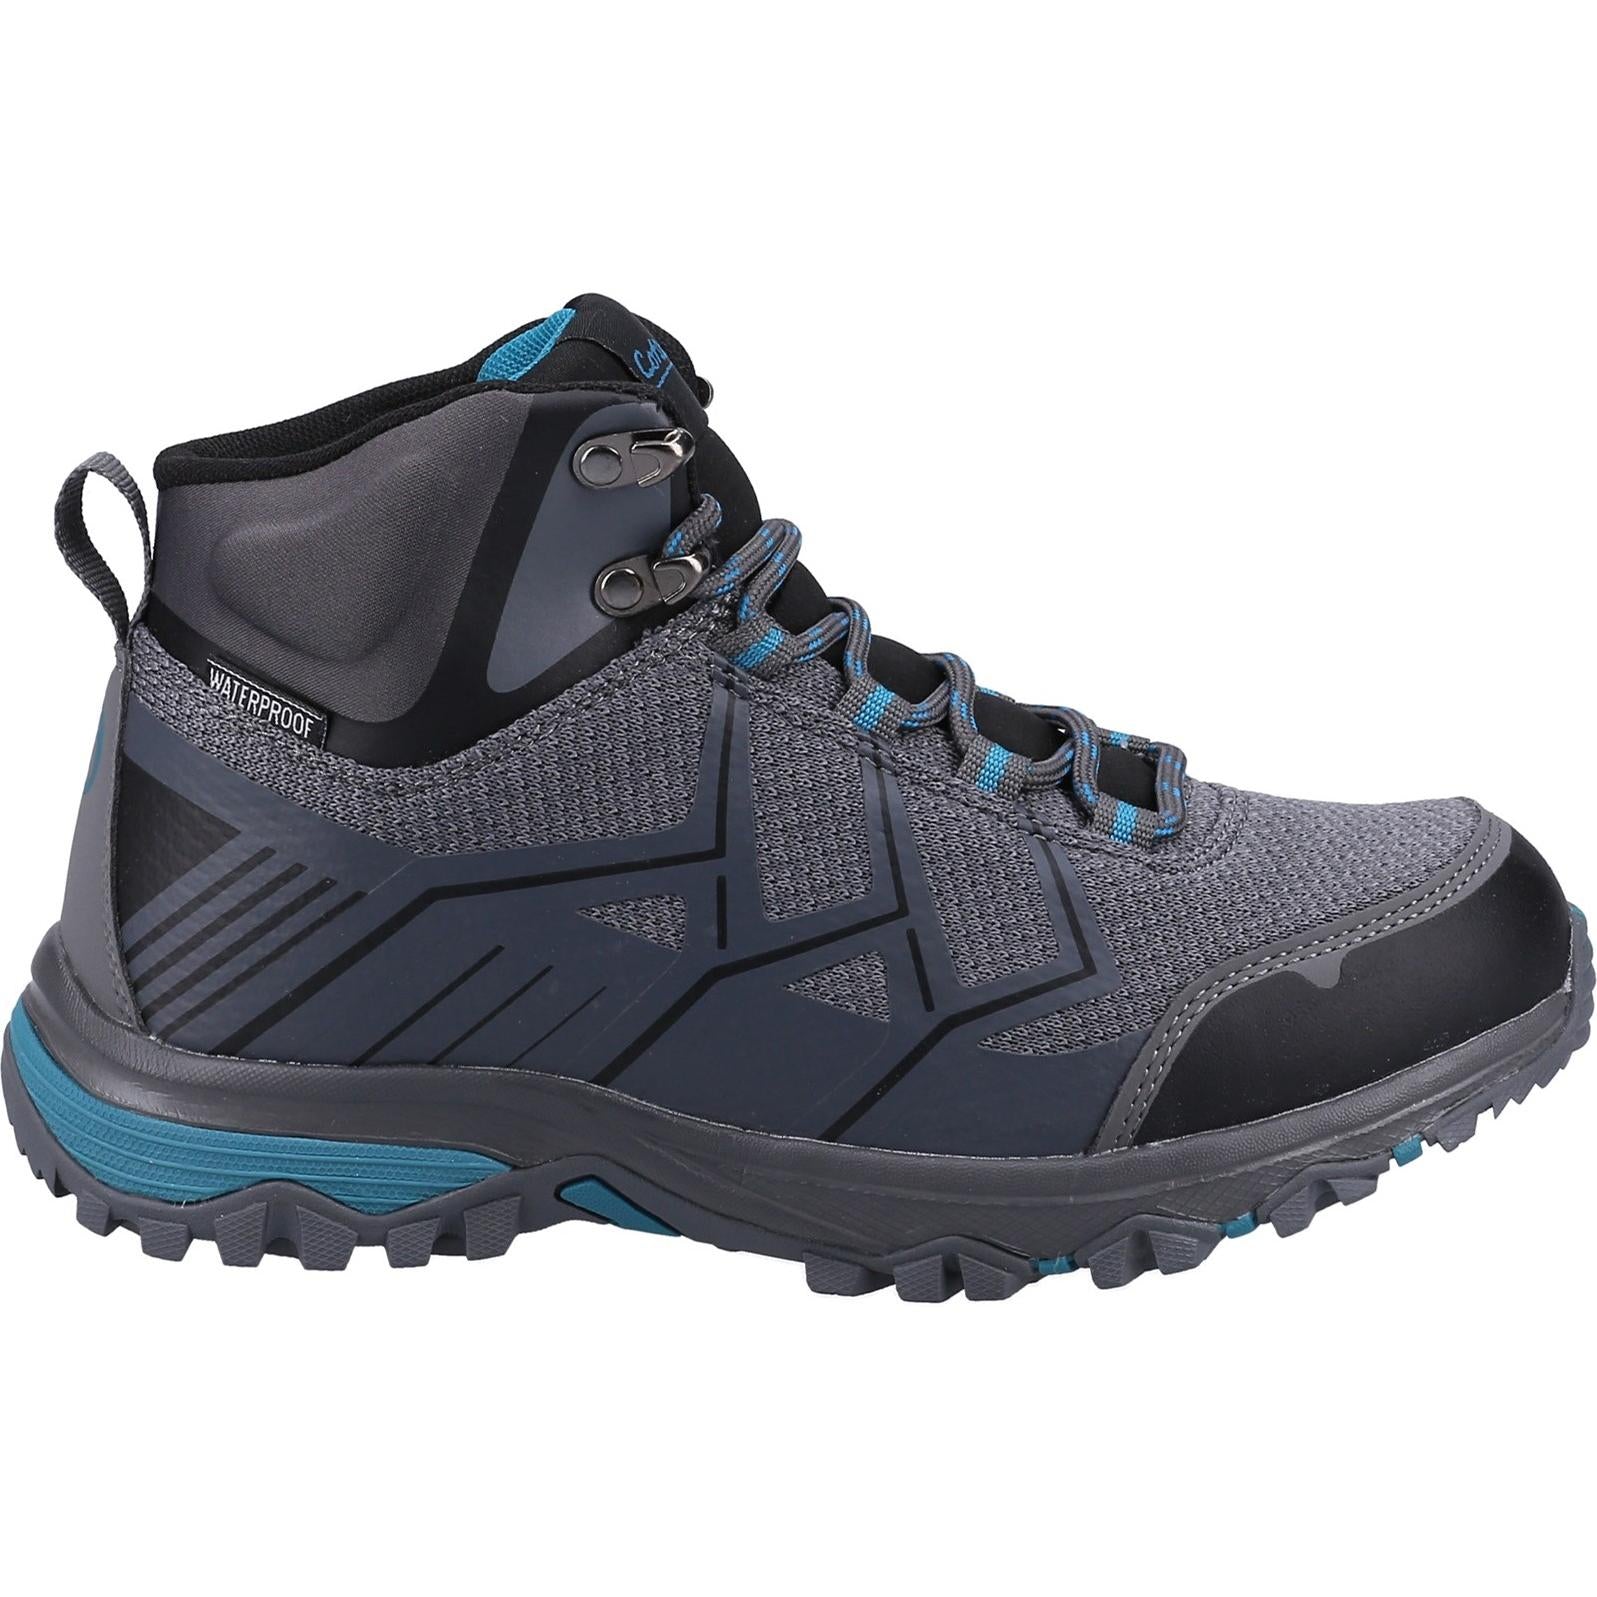 Cotswold Wychwood Recycled Hiking Boots